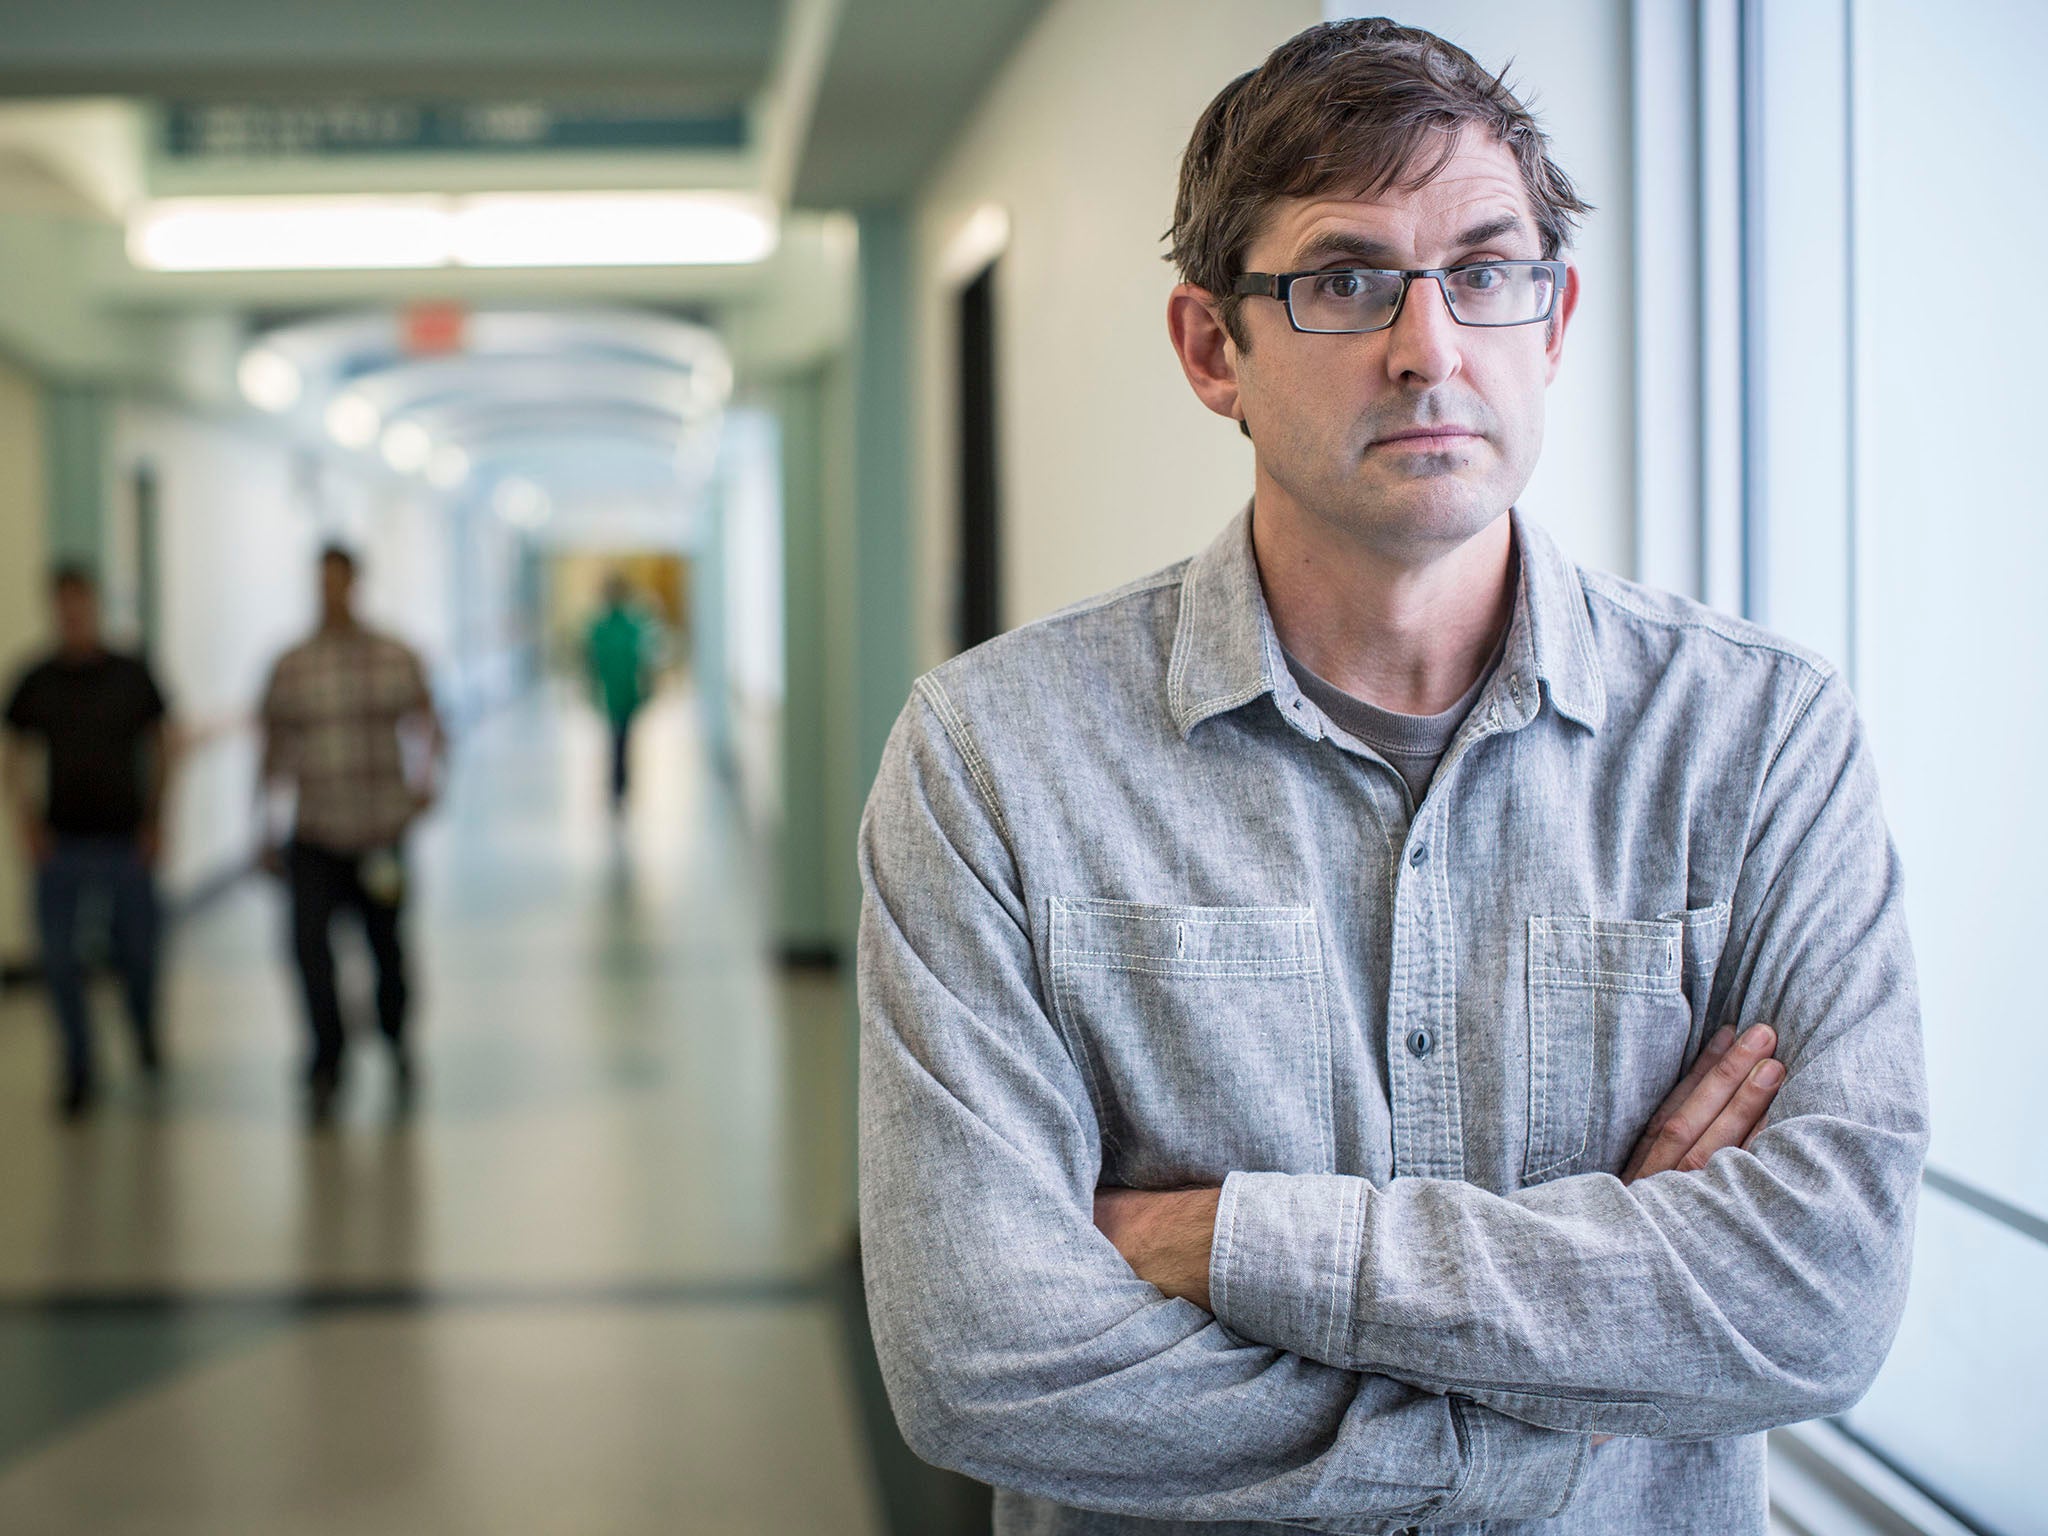 Louis Theroux: By Reason of Insanity